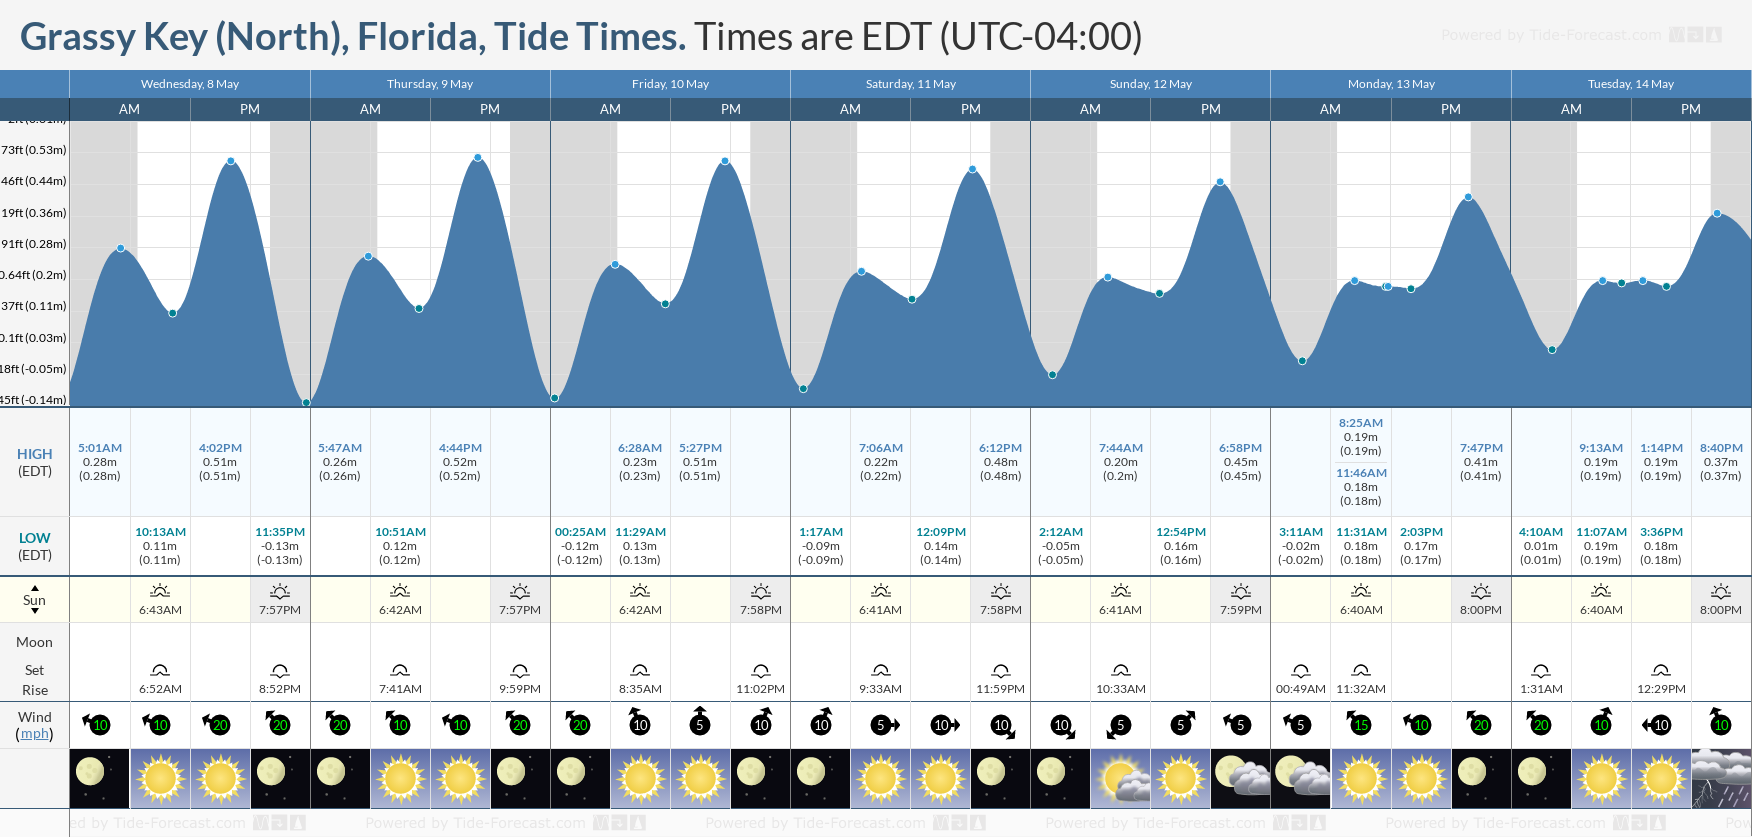 Grassy Key (North), Florida Tide Chart including high and low tide tide times for the next 7 days